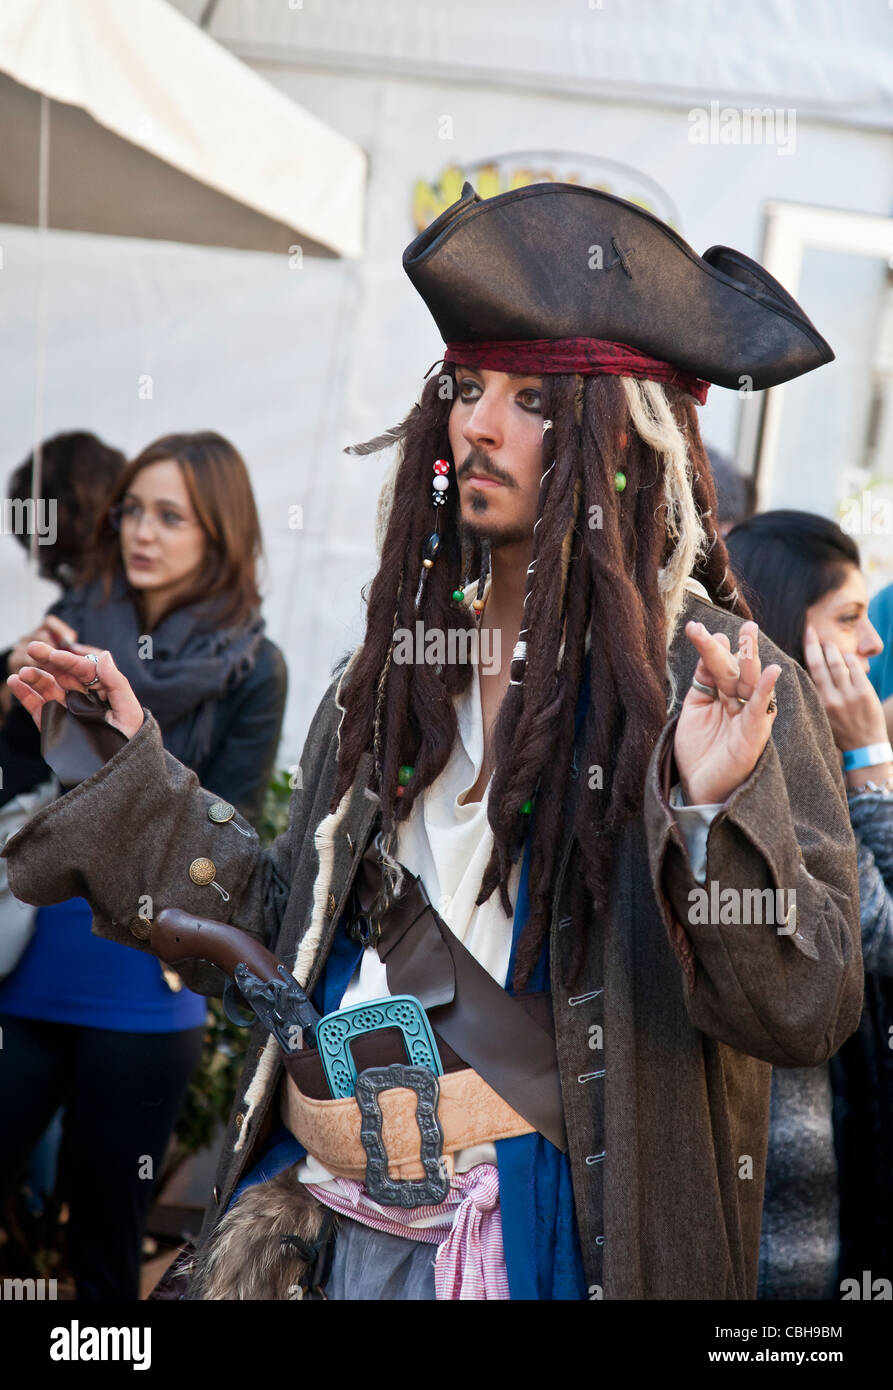 Young man dressed as Captain Jack Sparrow from Pirates of the Caribbean: Lucca comics and games festival, 2011 Tuscany, Italy Stock Photo